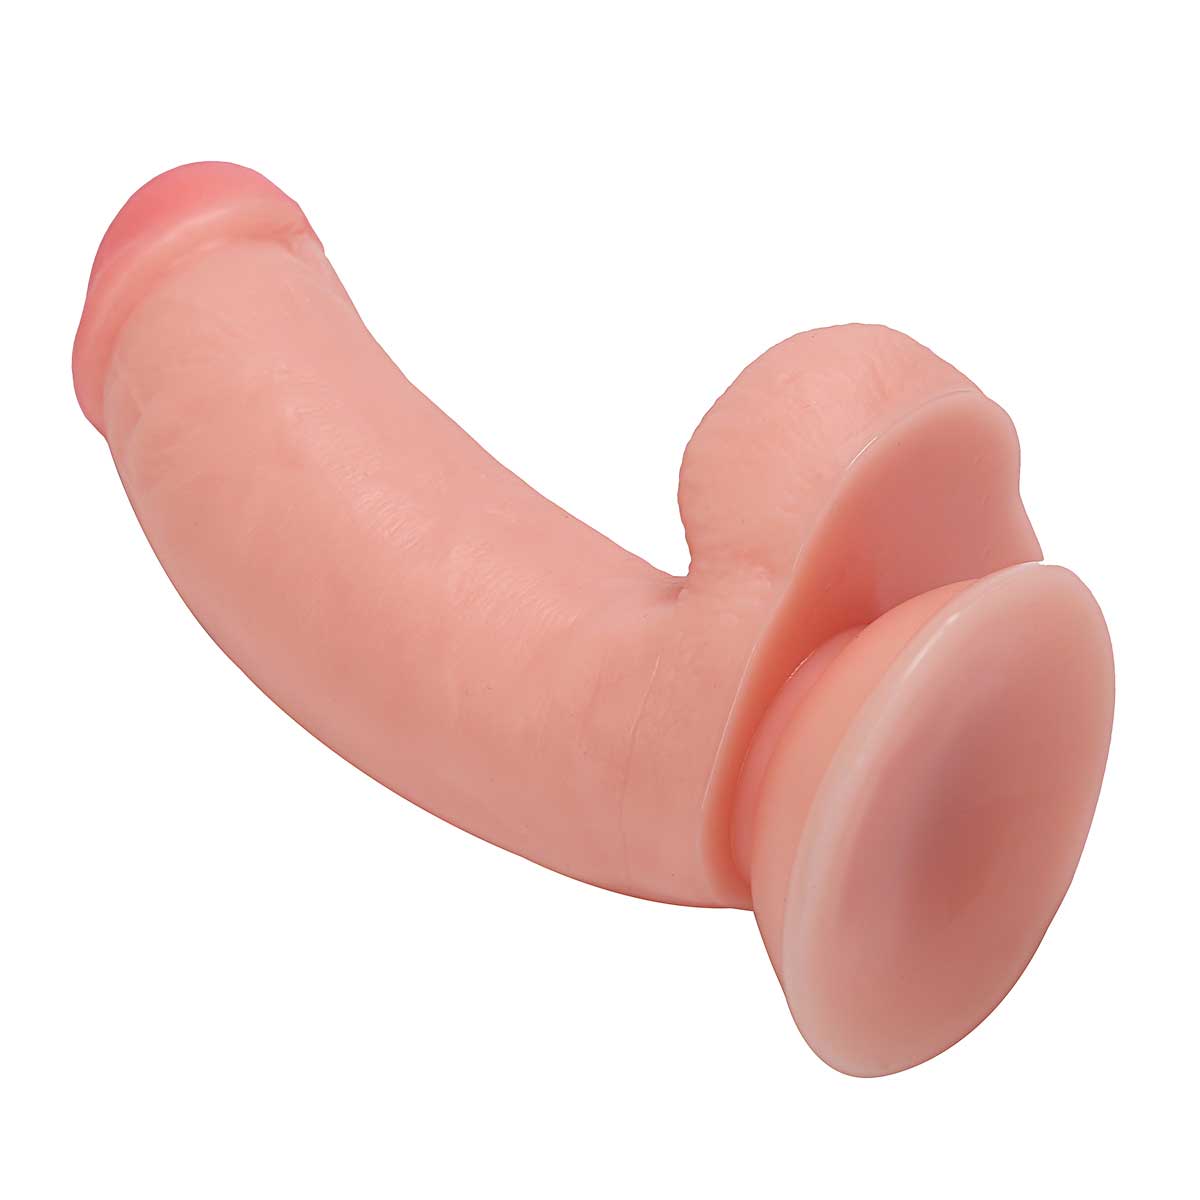 6.89 inches Little Wolf Dog Realistic dildo